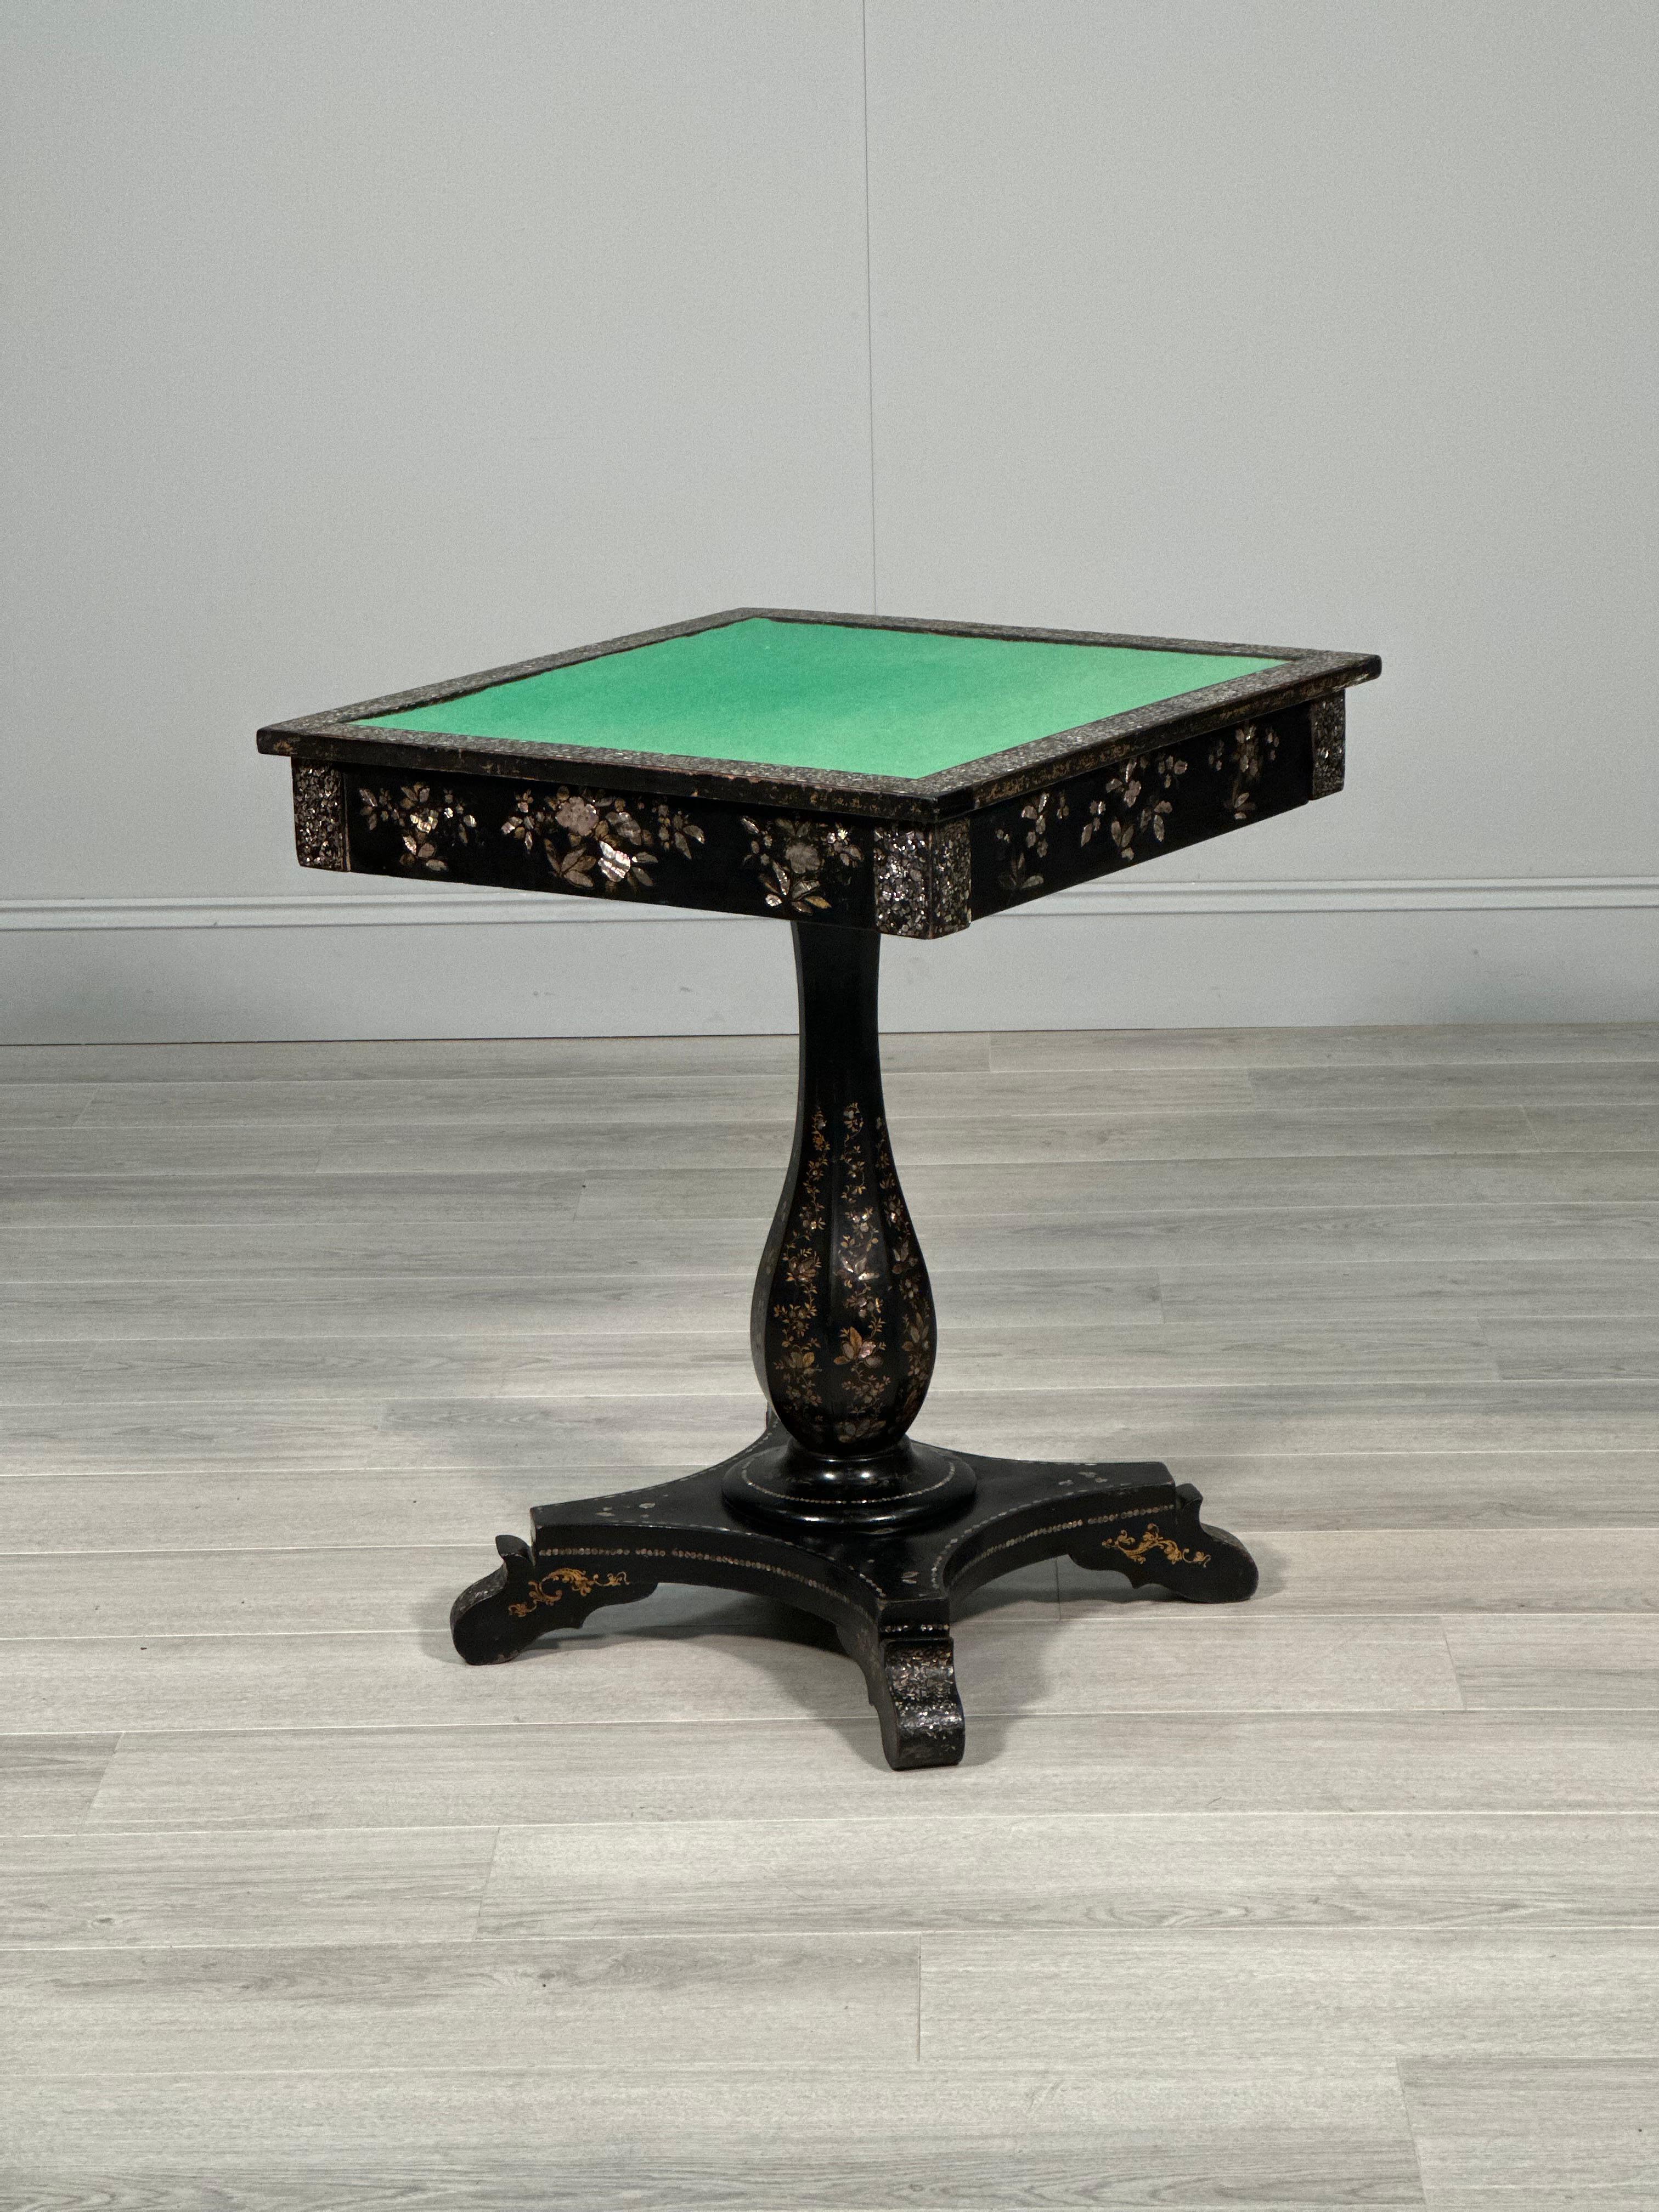 Antique ebonised papier mache mother of pearl games table dating to the second half of the 19th century. The table has an oak frame with a papier mache and mother of pearl ebonised finish with a oak lined drawer to one side. The table is in very